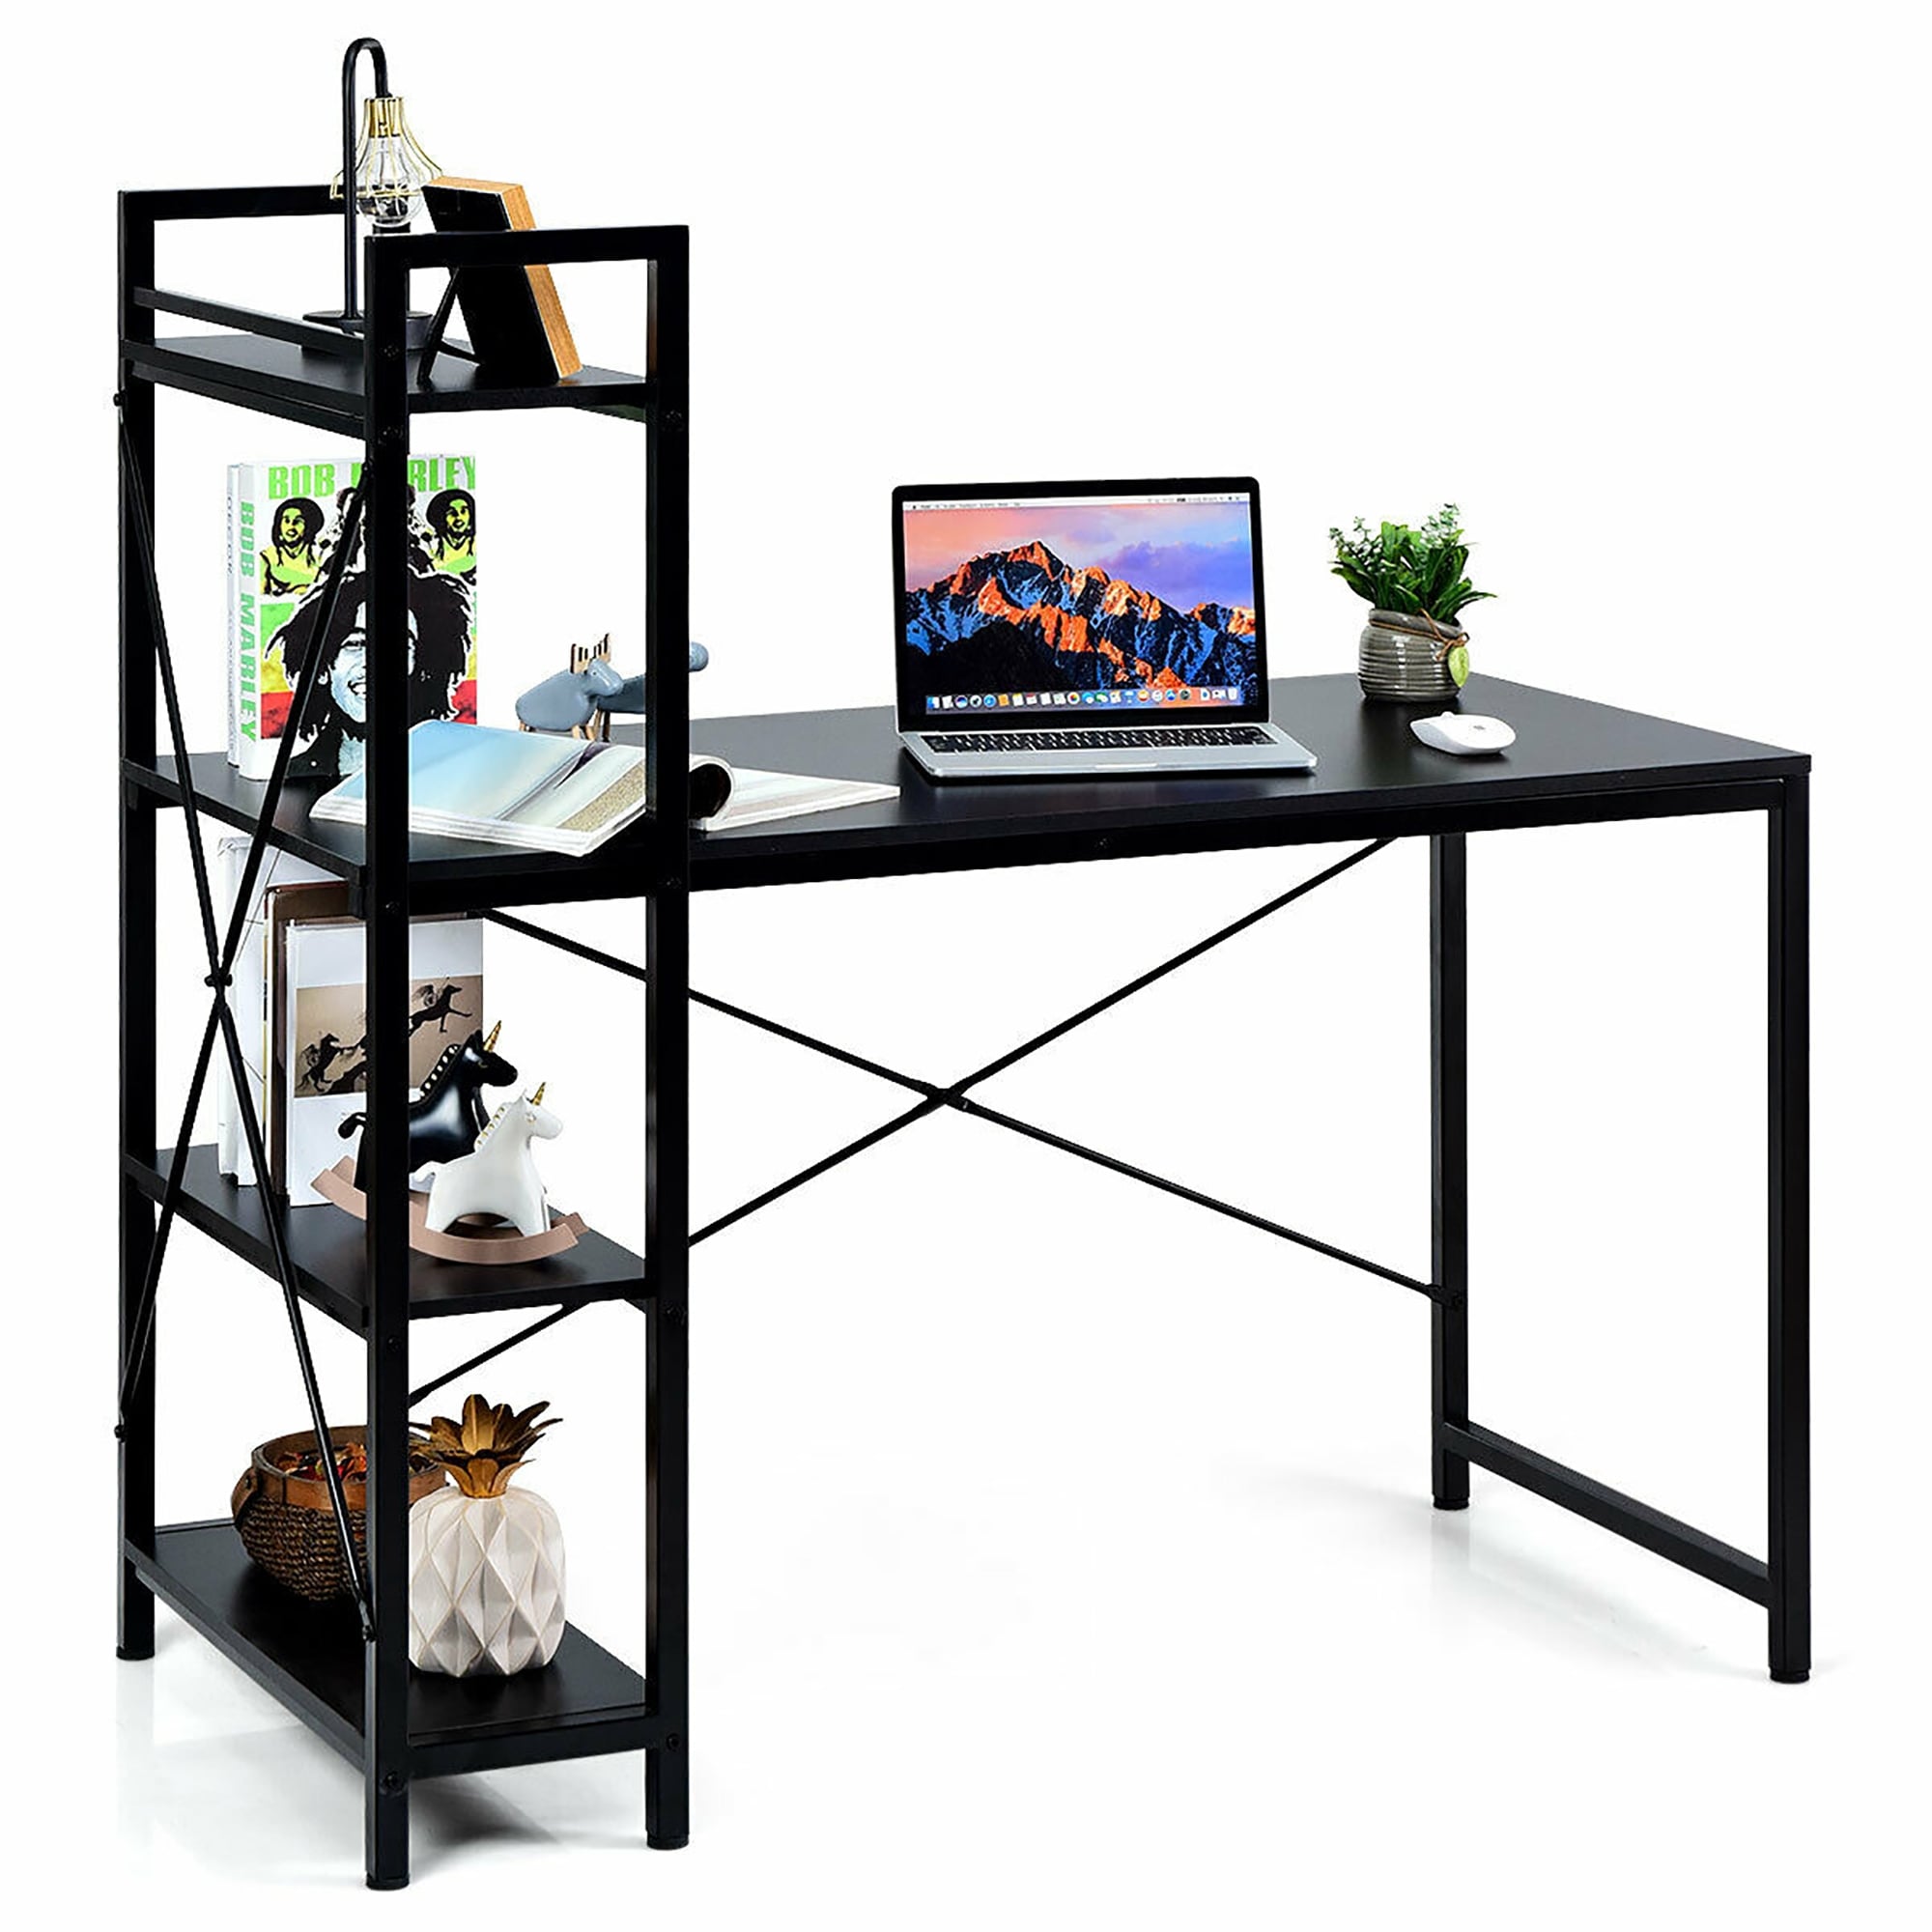 Black Small Size TANGKULA Computer Desk Writing Table Simple Home Office Computer Workstation with Tempered Glass Top & Iron Frame Student Writing Desk Home Furniture 